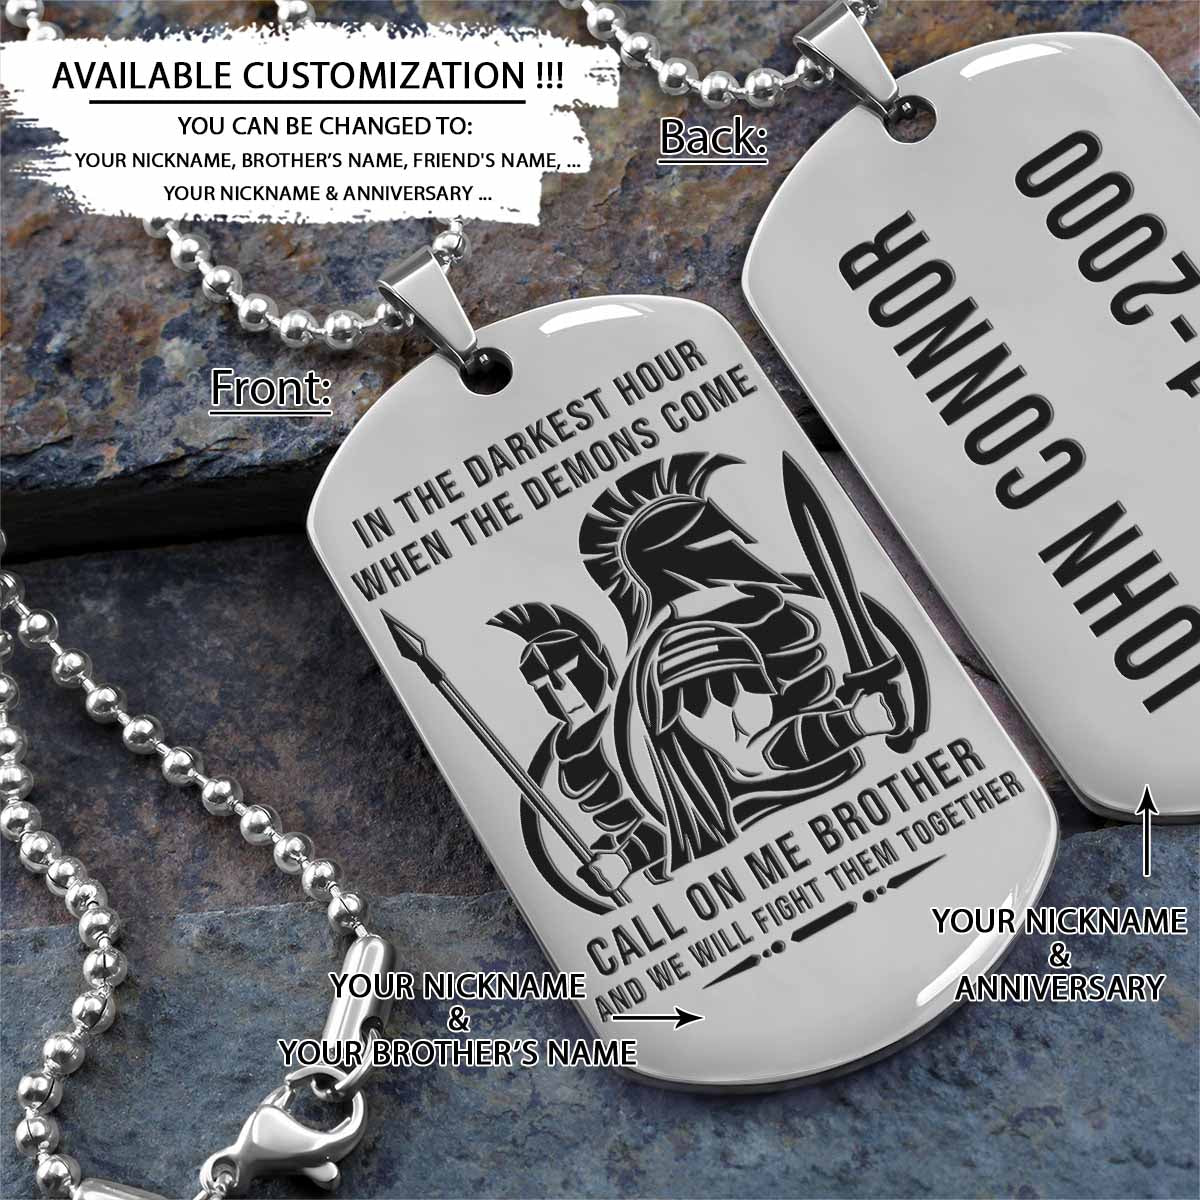 WAD062 - Call On Me Brother - Warrior - Spartan Necklace - Engrave Silver Dog Tag